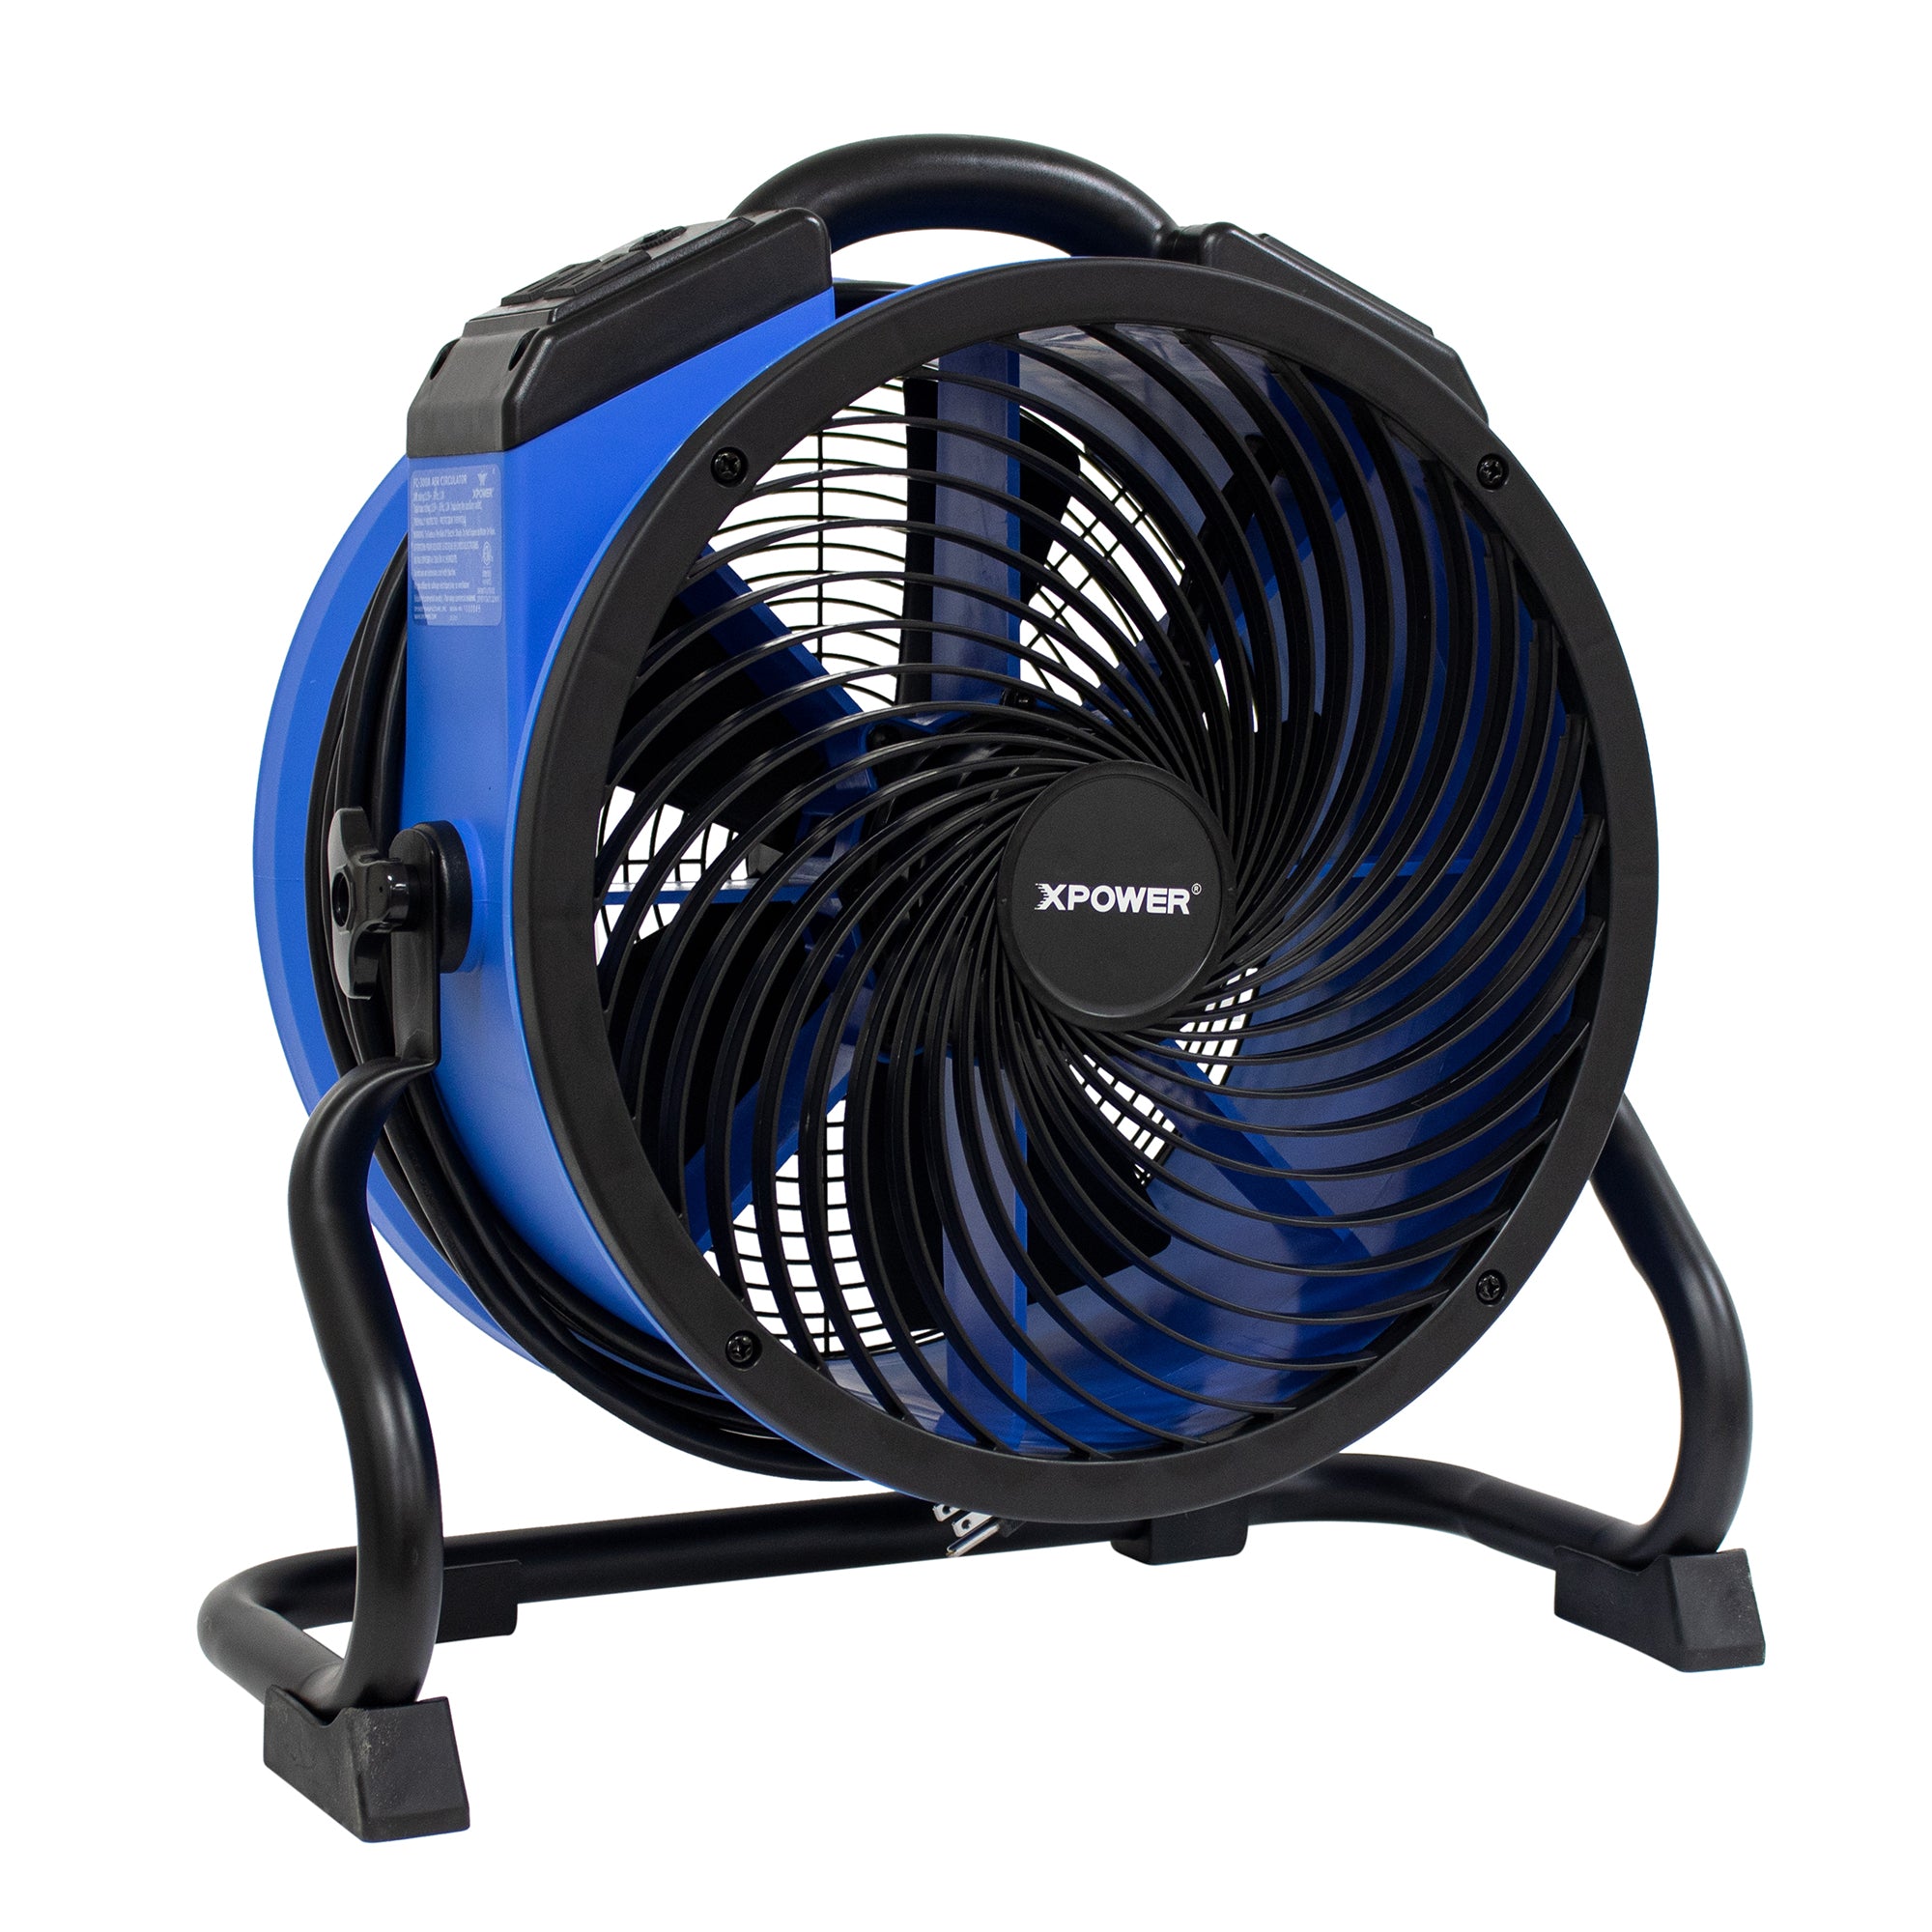 XPOWER P-39AR 1/4 HP 2100 CFM 4 Speed Industrial Axial Air Mover, Blower, Fan with Built-in Power Outlets - Blue